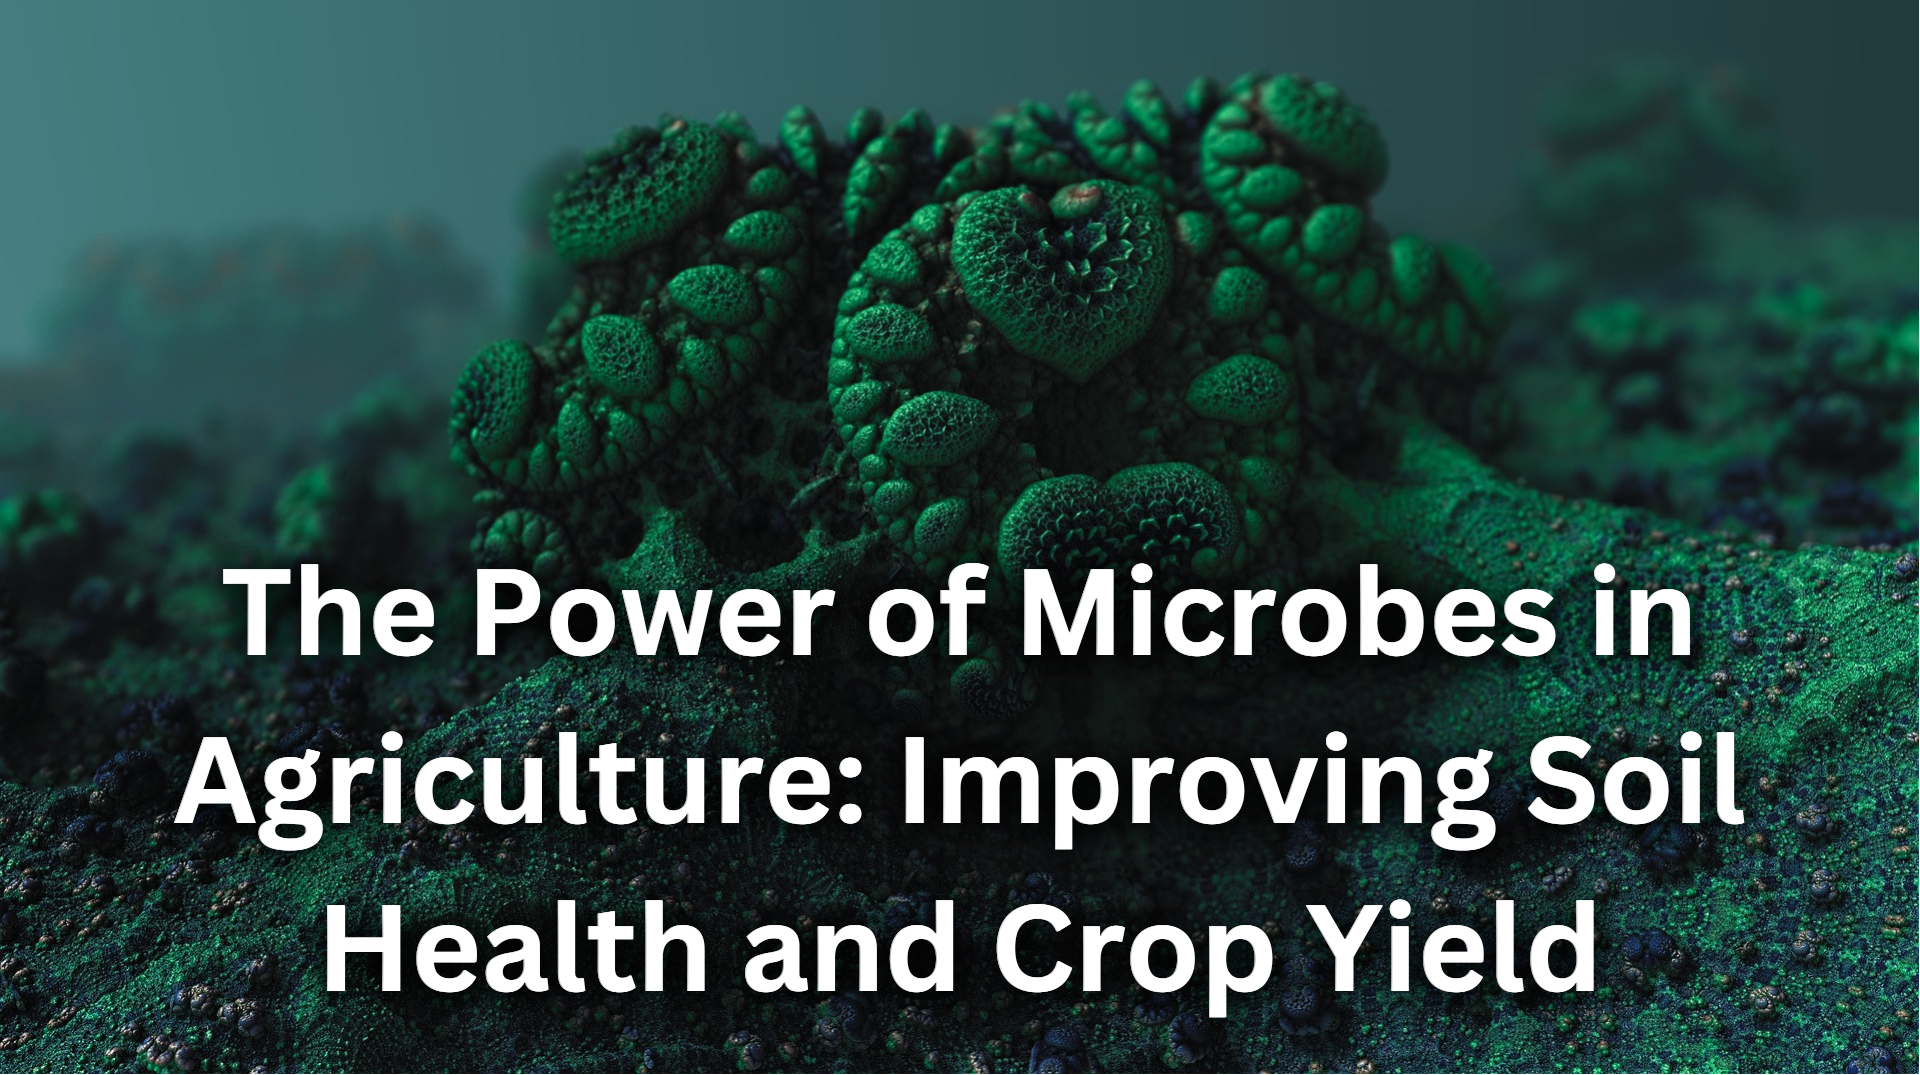 The Role of Microbes in Agriculture: How Microorganisms Can Improve Soil Health and Crop Yield